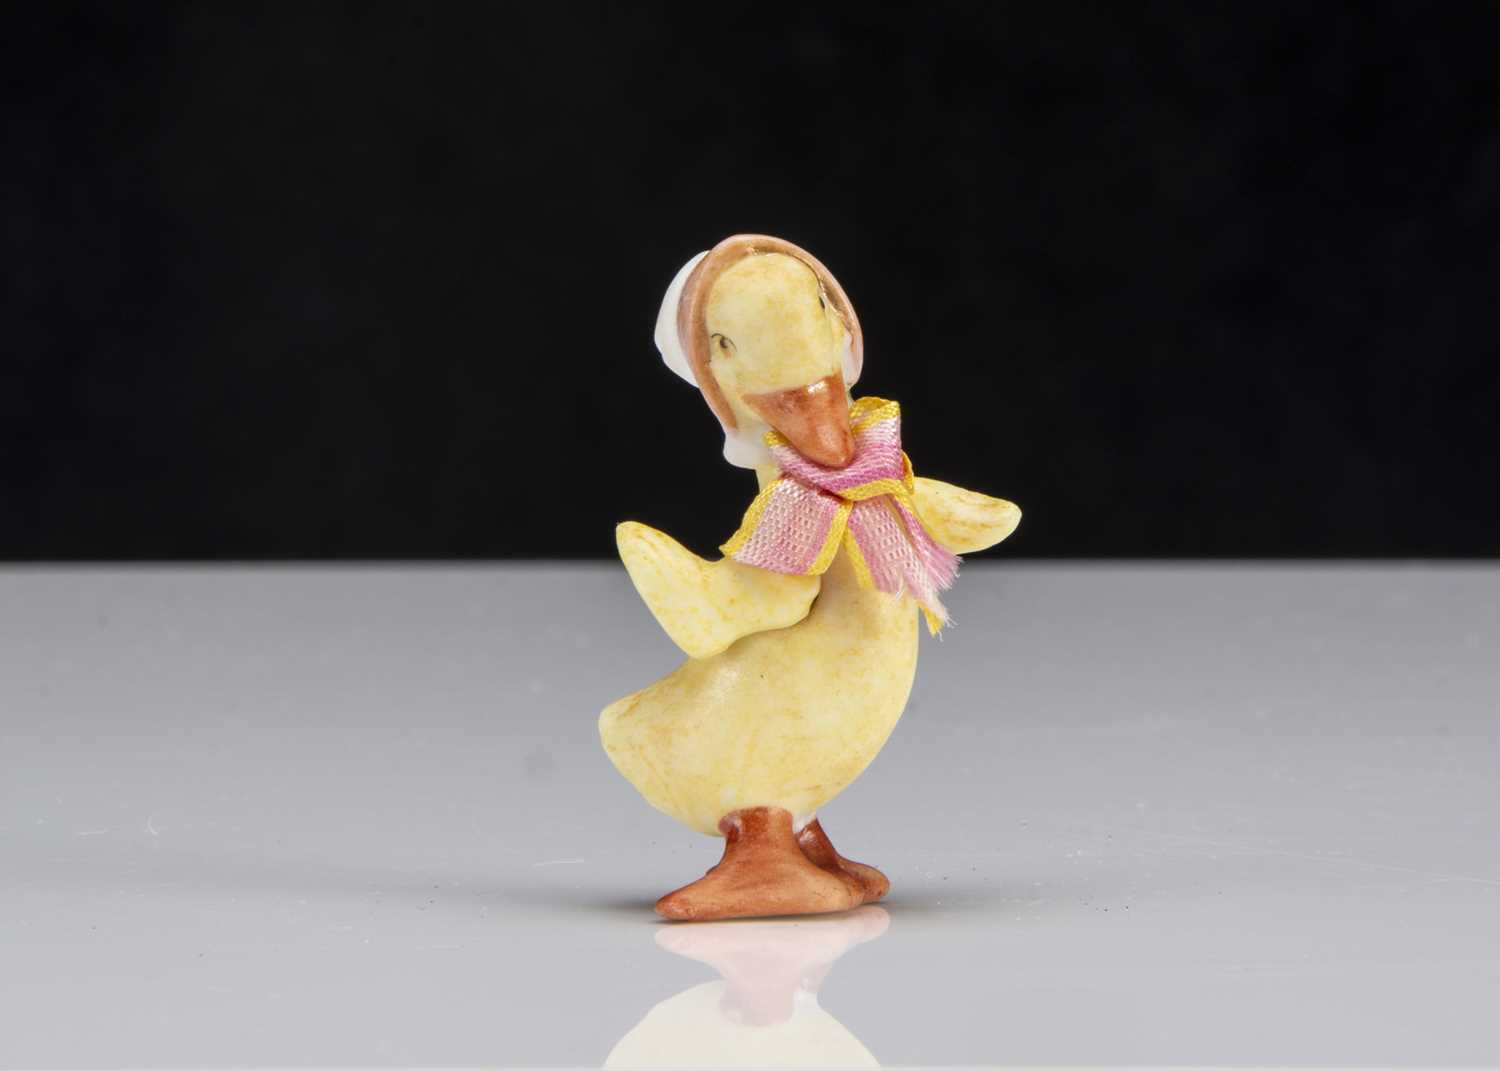 Lot 135 - A Hertwig all-bisque duckling dolls’ house doll